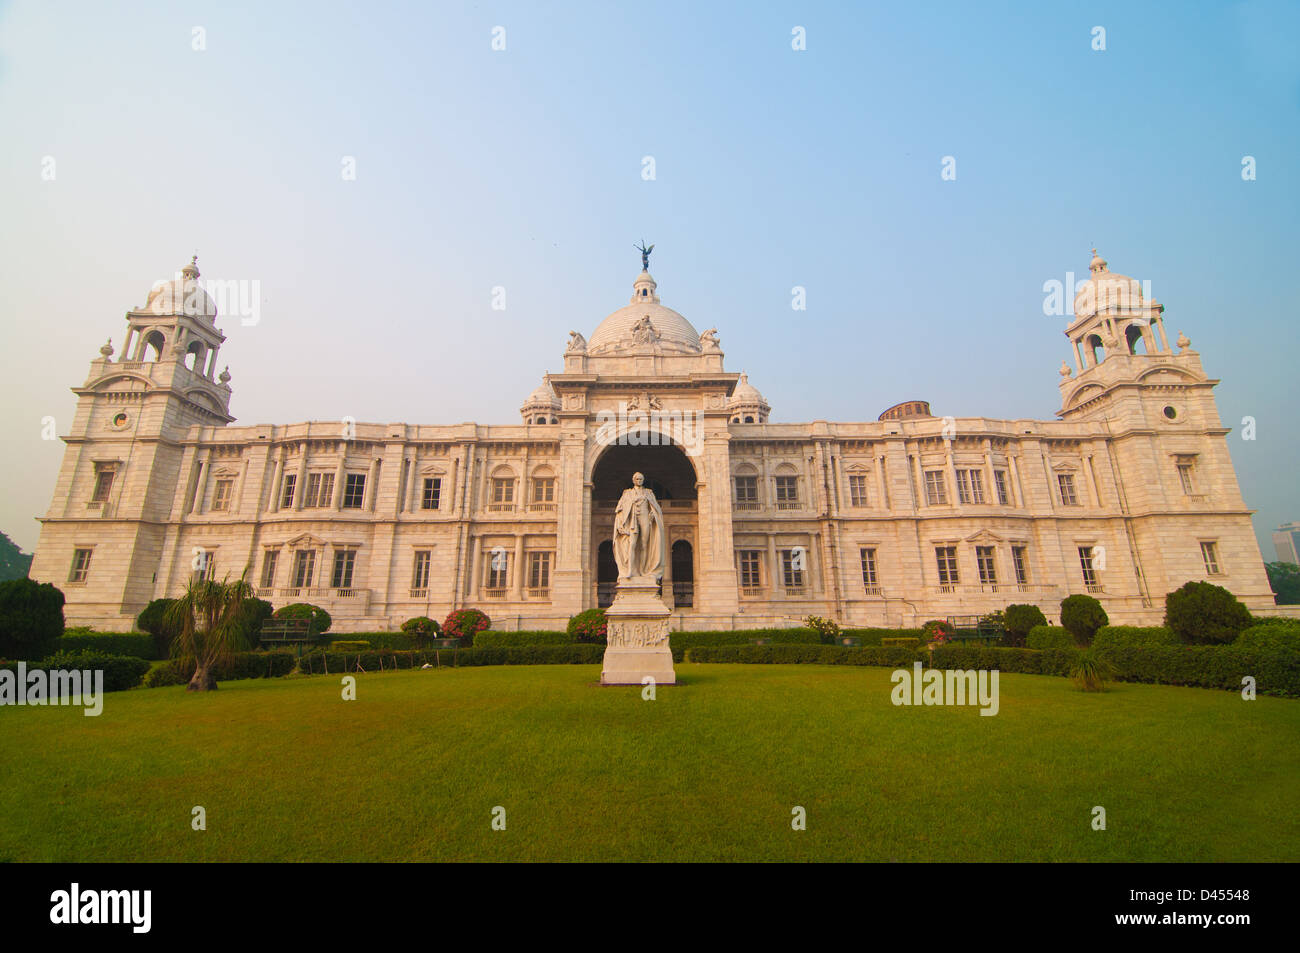 Landmark building of Calcutta or Kolkata, Victoria Memorial Hall with Queen's Garden in the front, white Marble and blue sky Stock Photo